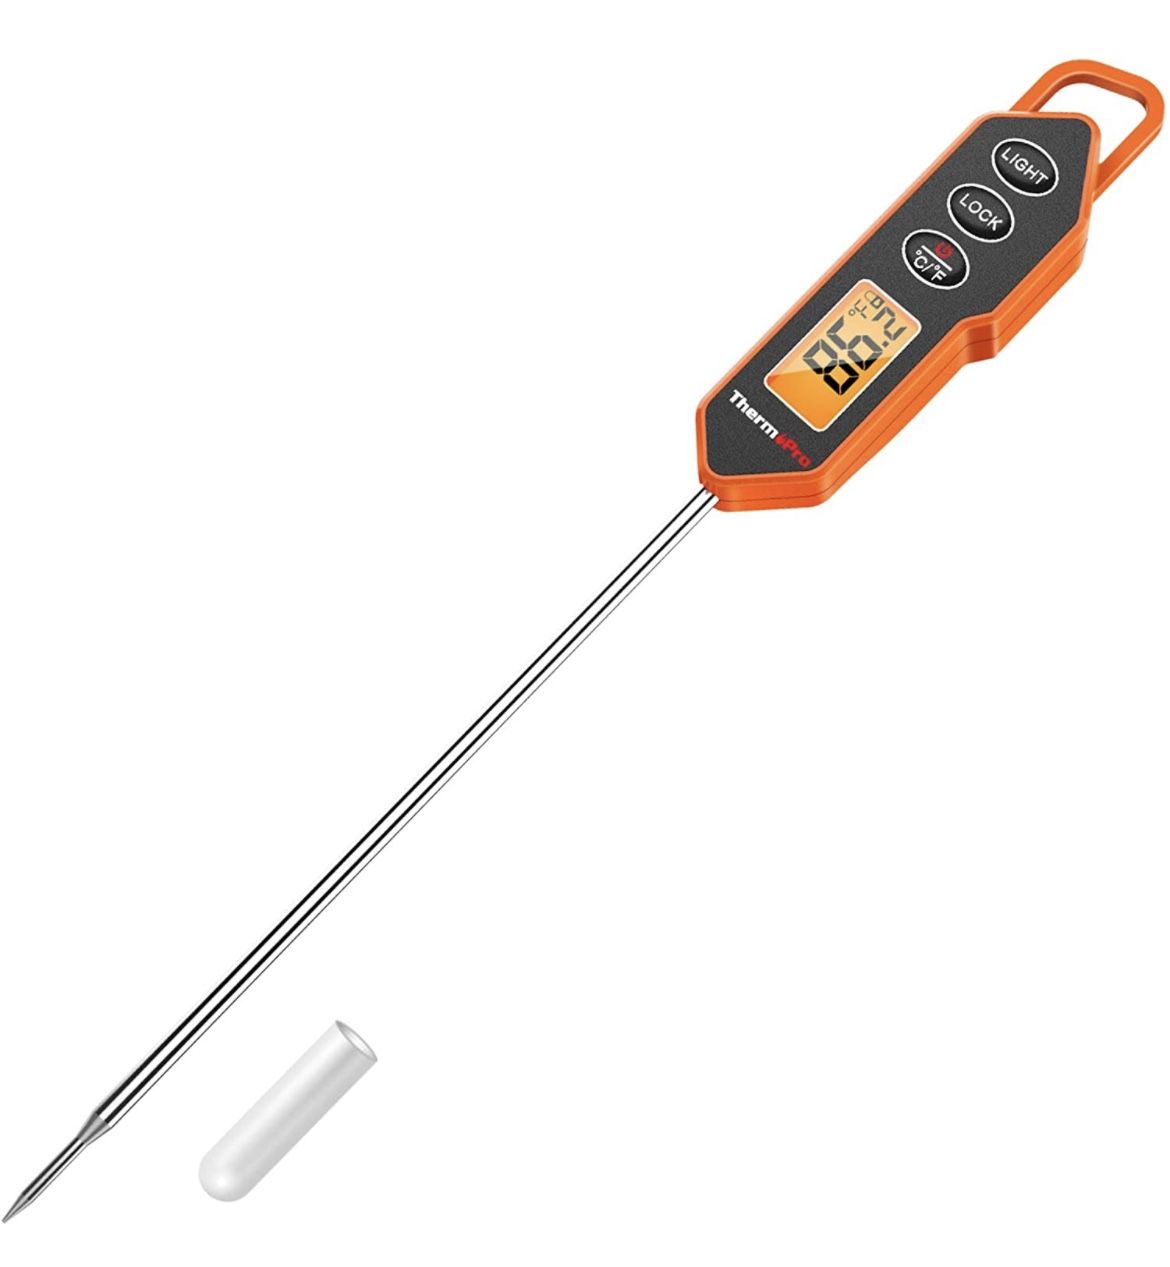 ThermoPro Digital Instant Read Meat Thermometer for Grilling Cooking Food Candy Thermometer for BBQ Smoker Grill Smoker Oil Fry Kitchen Thermometer wi